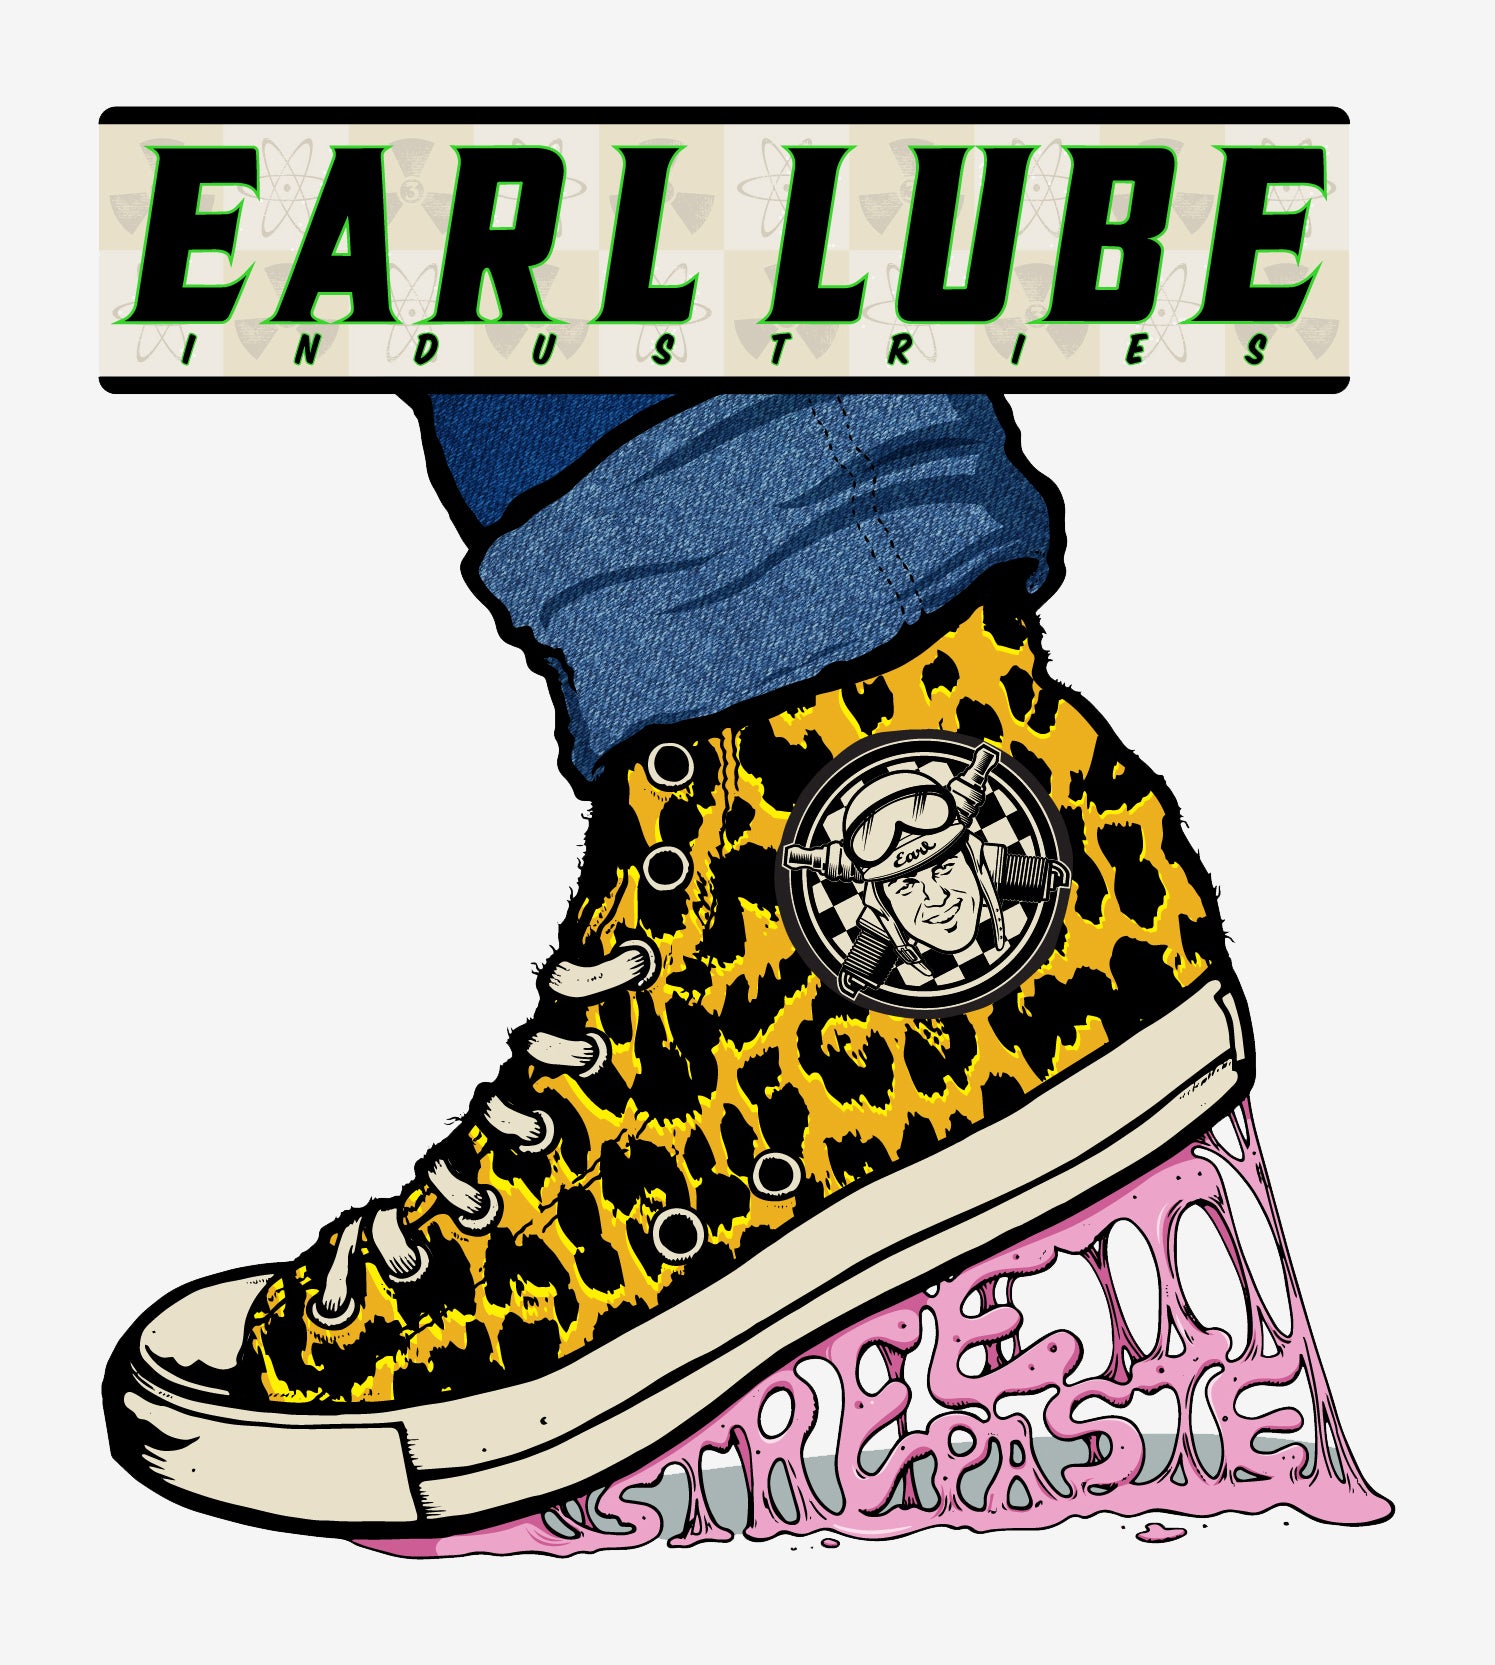 Earl Lube Paste Chuck: Earl Lee's branded rendition of the iconic Converse Chuck Taylor All Star tennis shoe, featuring pink bubble gum "street paste" adhered to the bottom. The addition of a leopard skin pattern infuses Earl's whimsical humor into the design, making it truly distinctive. 